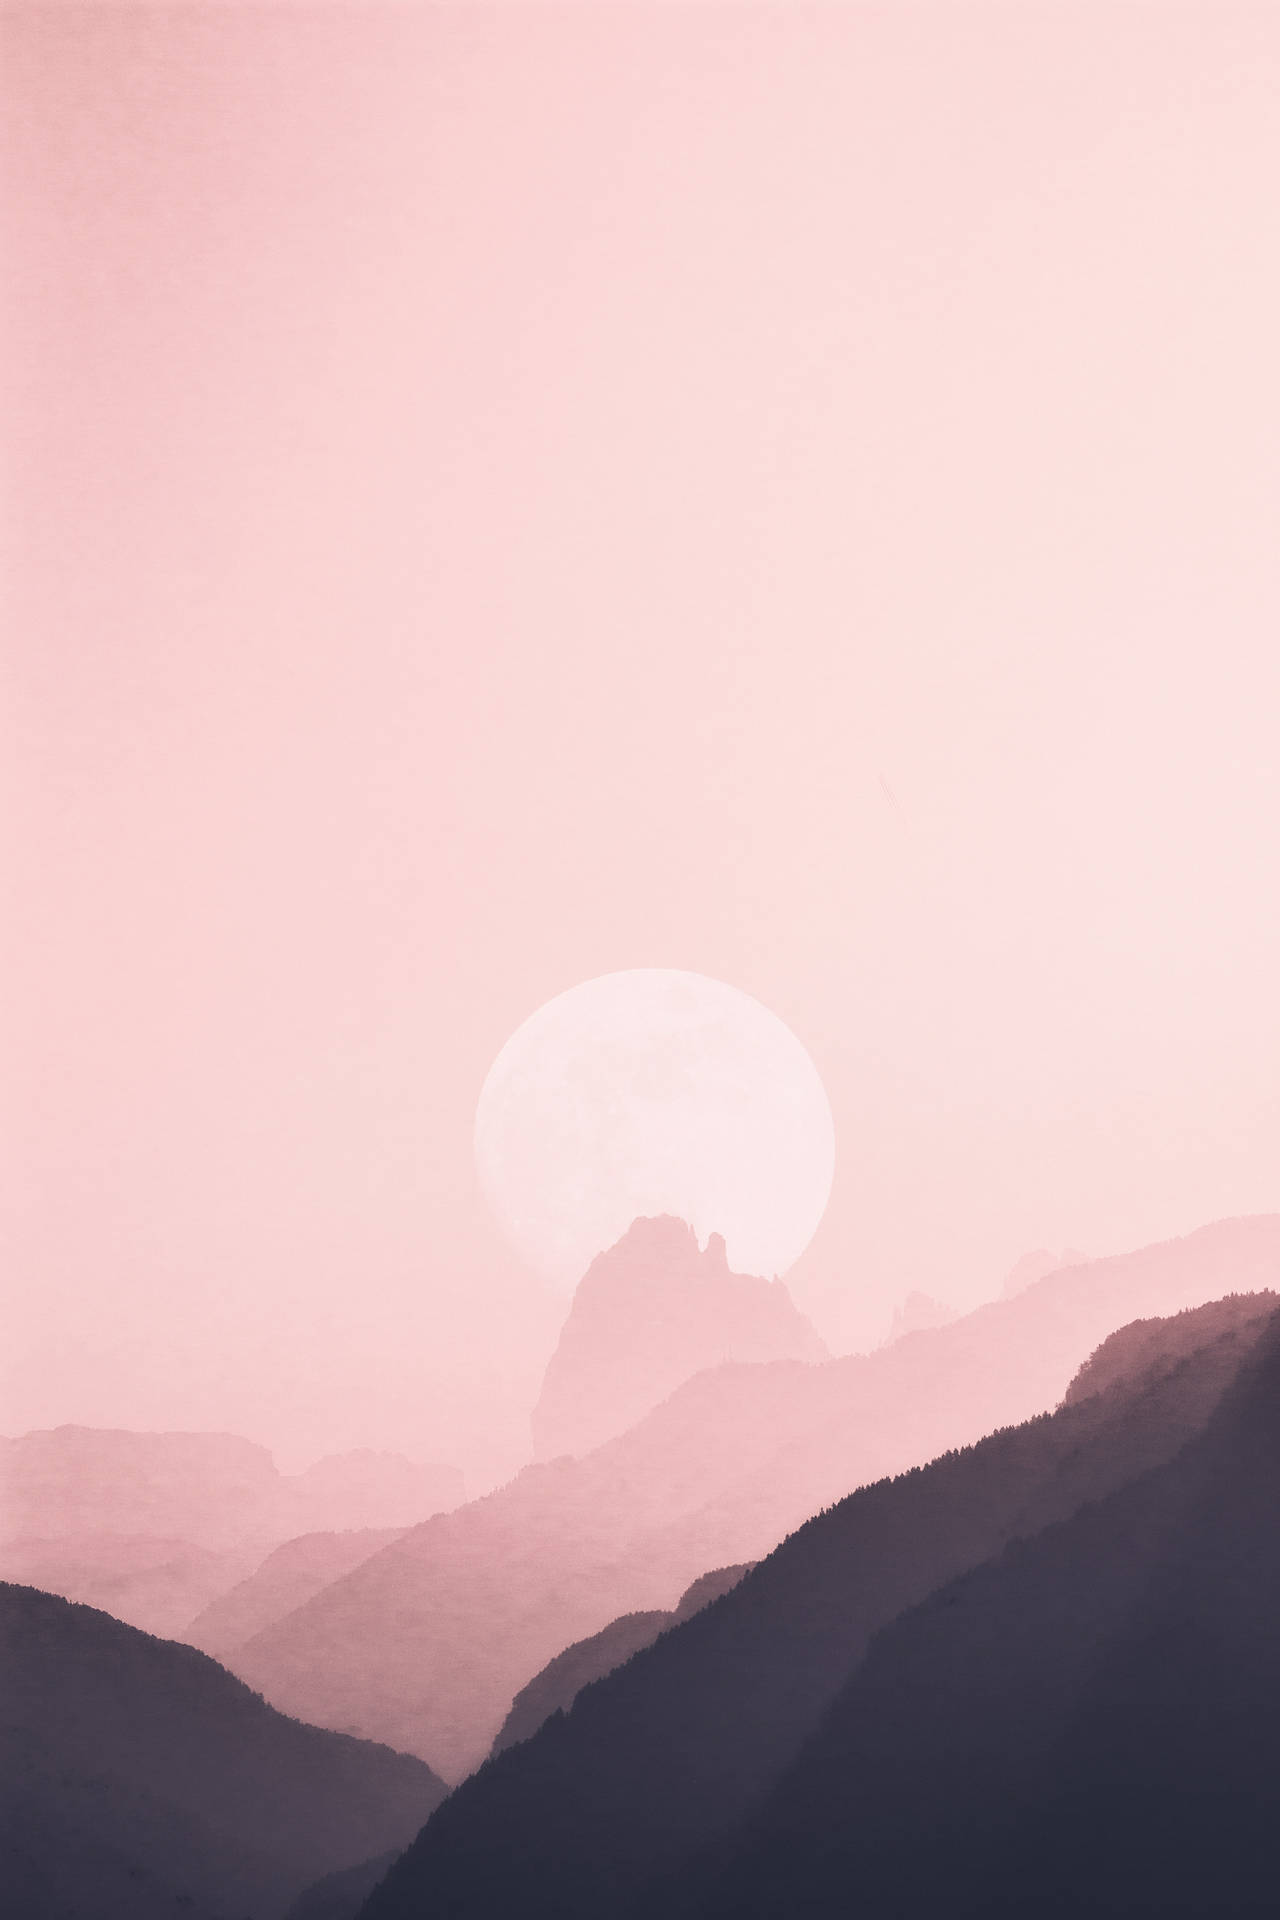 The Beauty Of A Full Moon Reflecting In A Peaceful, Pastel Sky Background